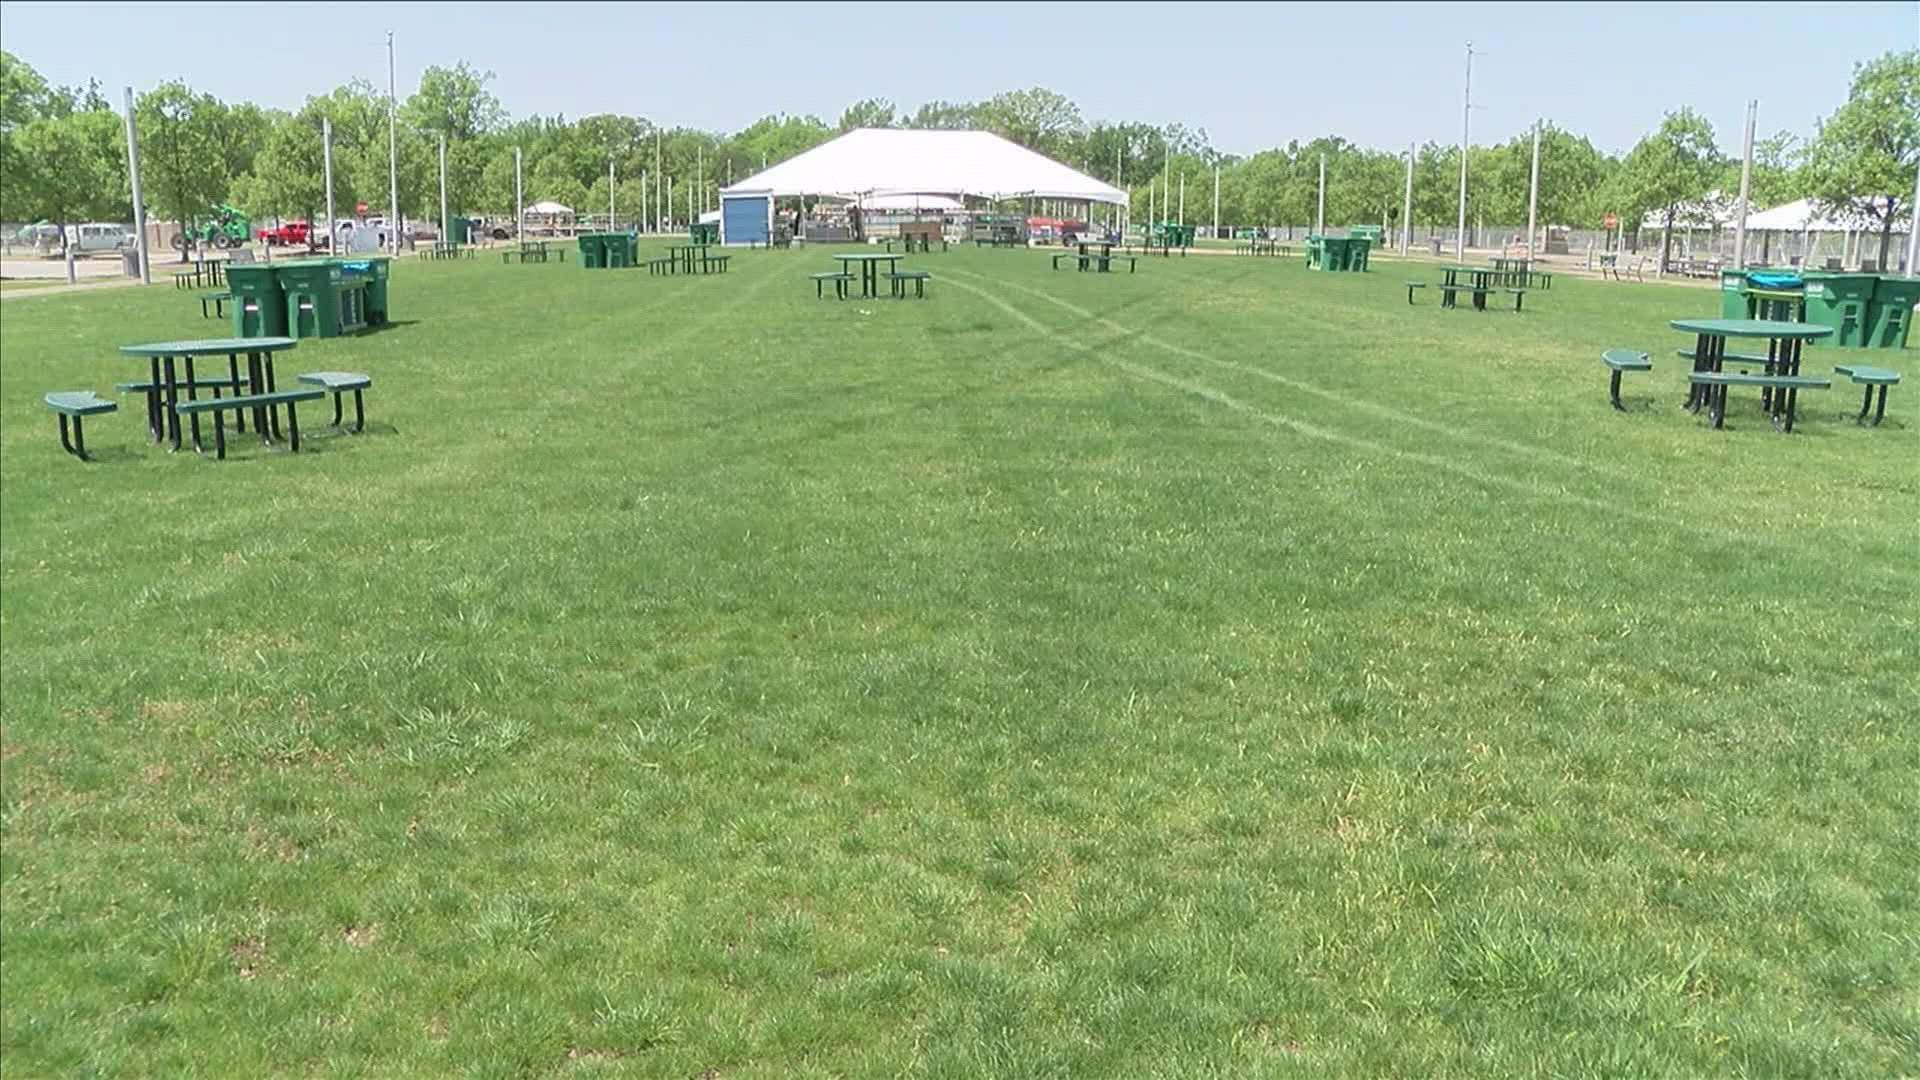 The festival and other Memphis In May events are being held in Midtown while Tom Lee Park is remodeled downtown. Parking will be limited compared to Tigers football.